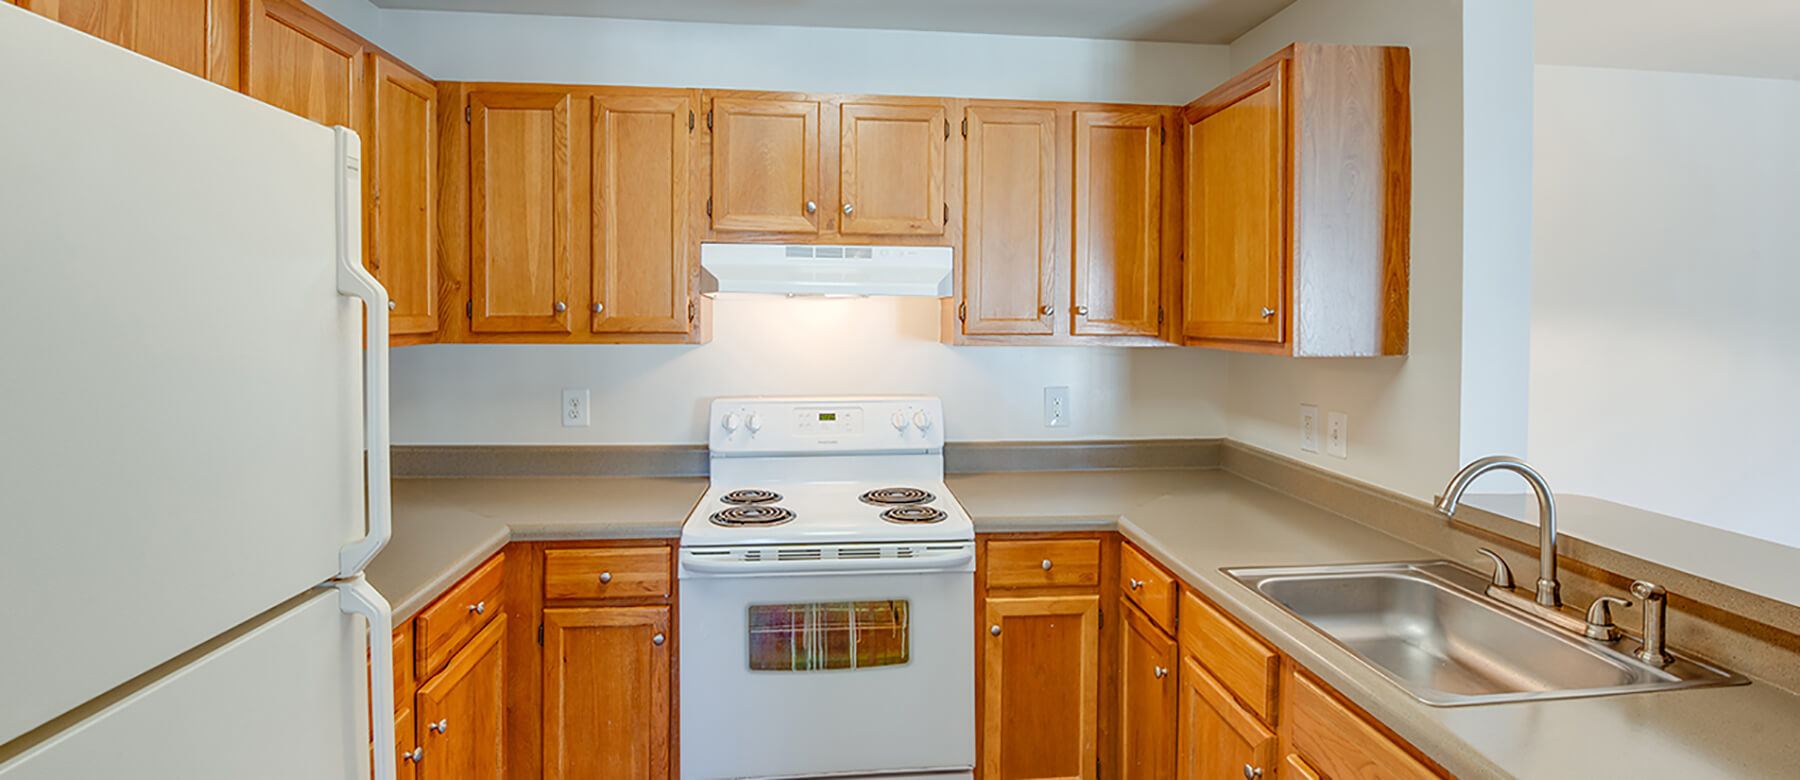 A kitchen with white appliances at the Riverwoods, Riverwoods at Towne Square, and Riverwoods at Lake Ridge Apartments in Woodbridge, Virginia.